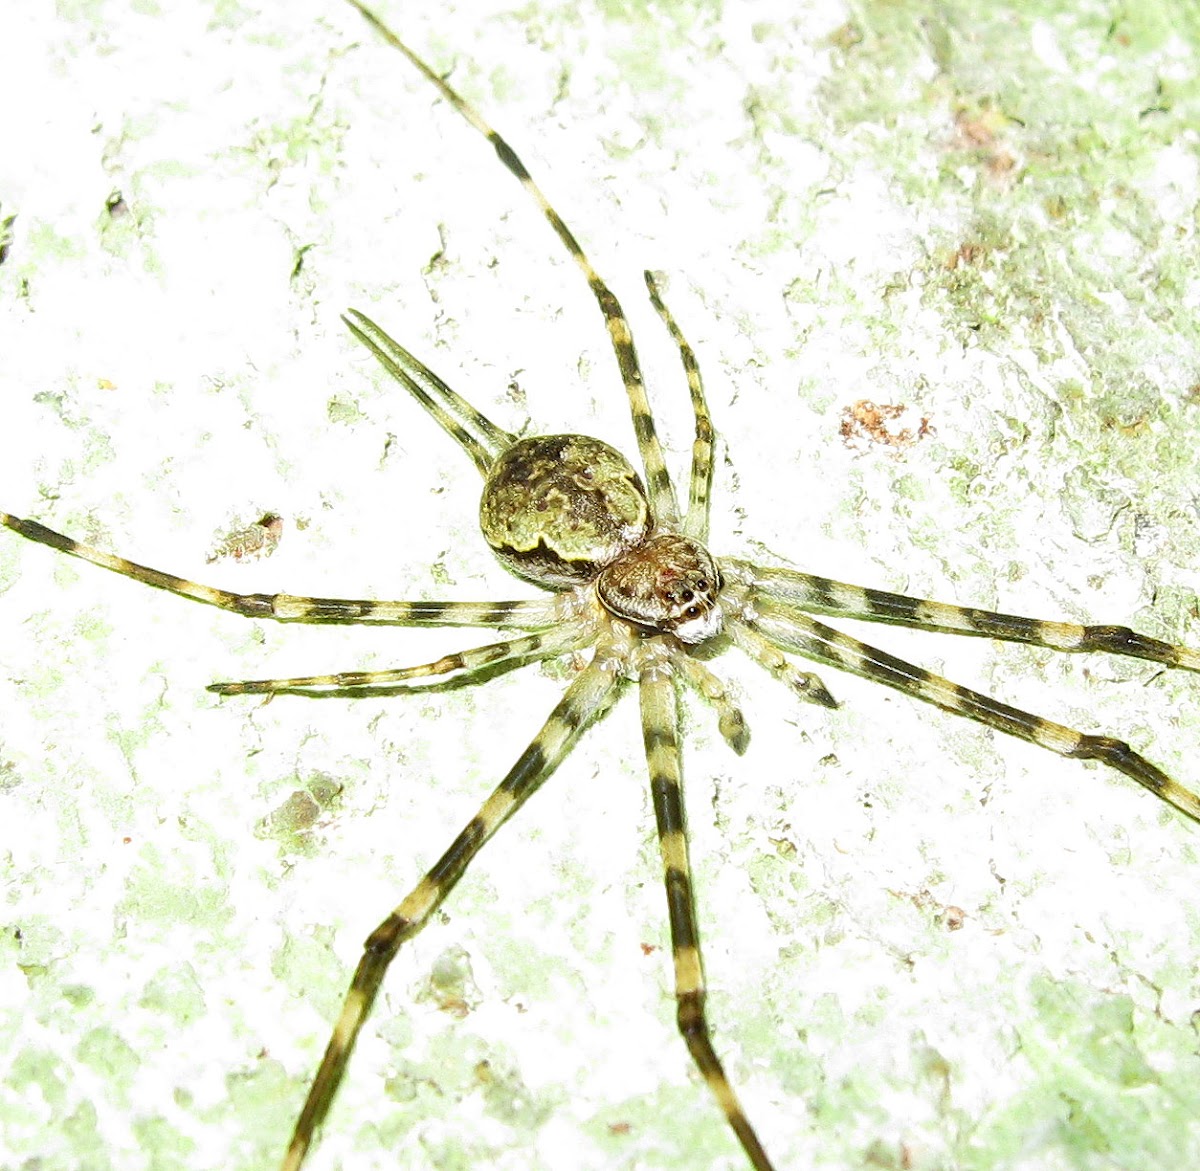 Long-tailed Tree Trunk Spider